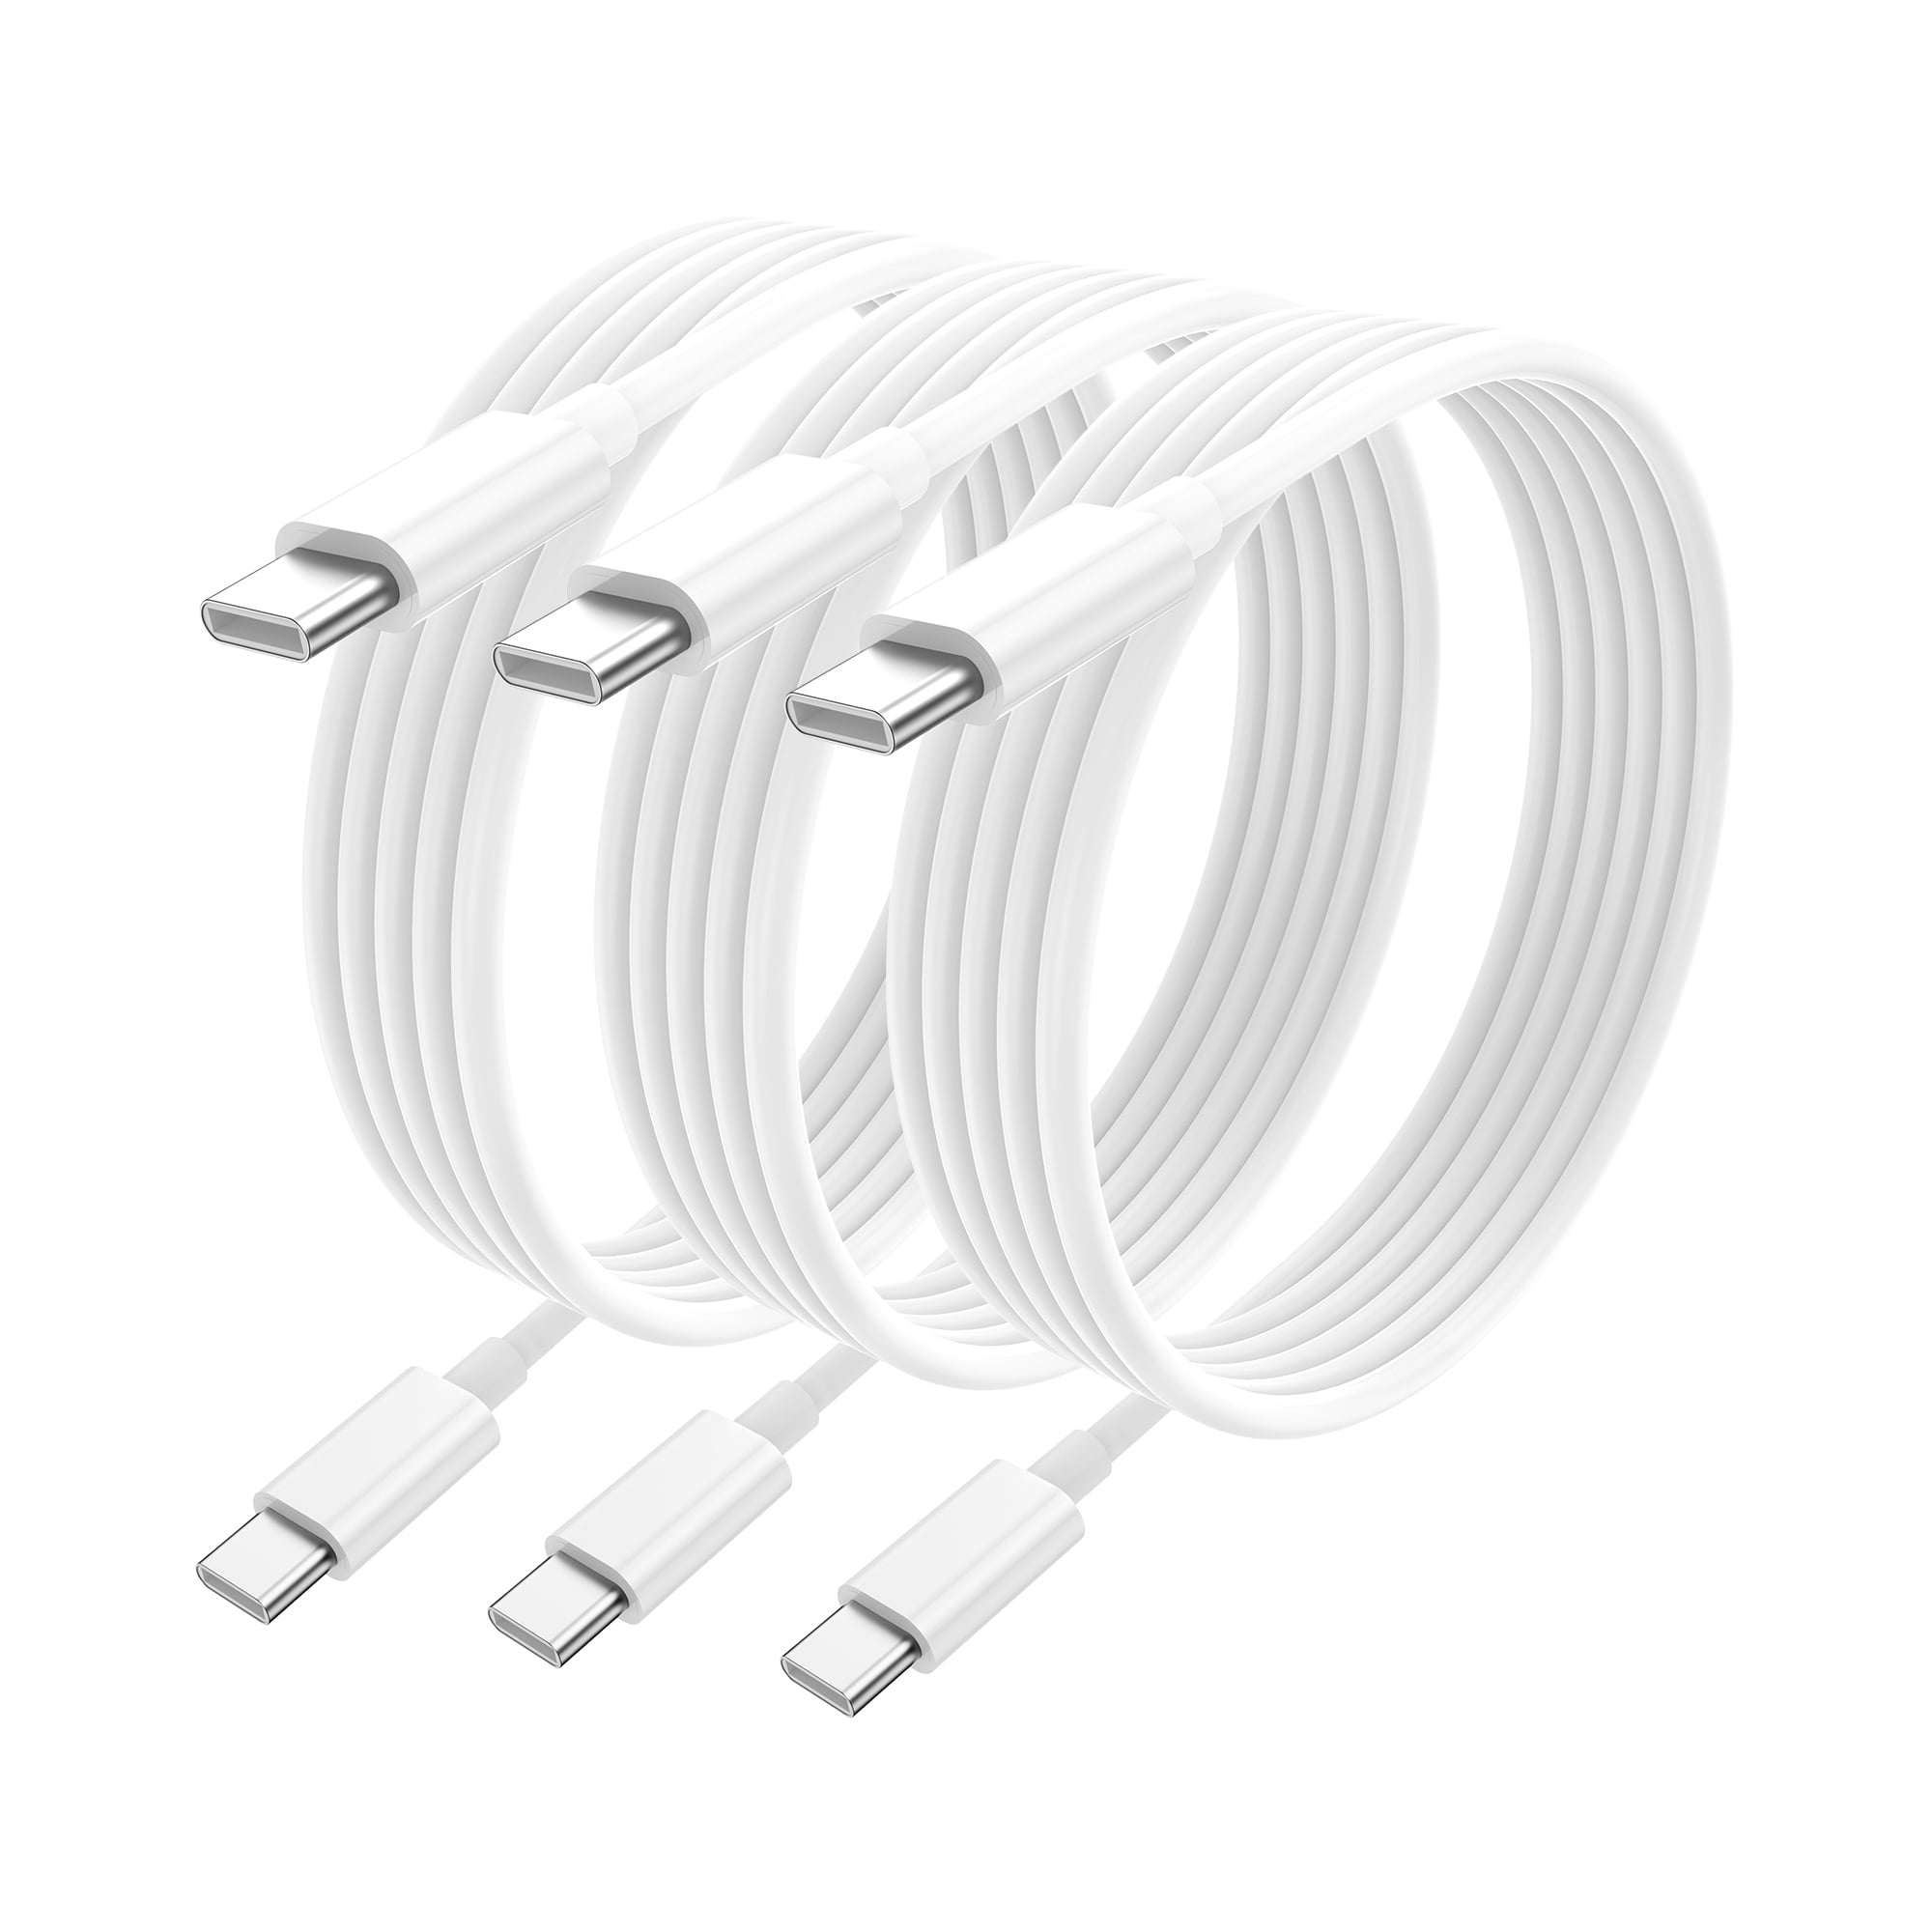 iPhone 15 Charger,Long 10ft 5-Pack USB C to USB C Fast Charging Cable,  PTQHDG 60W Charger Cord for iPhone 15/iPad/Samsung